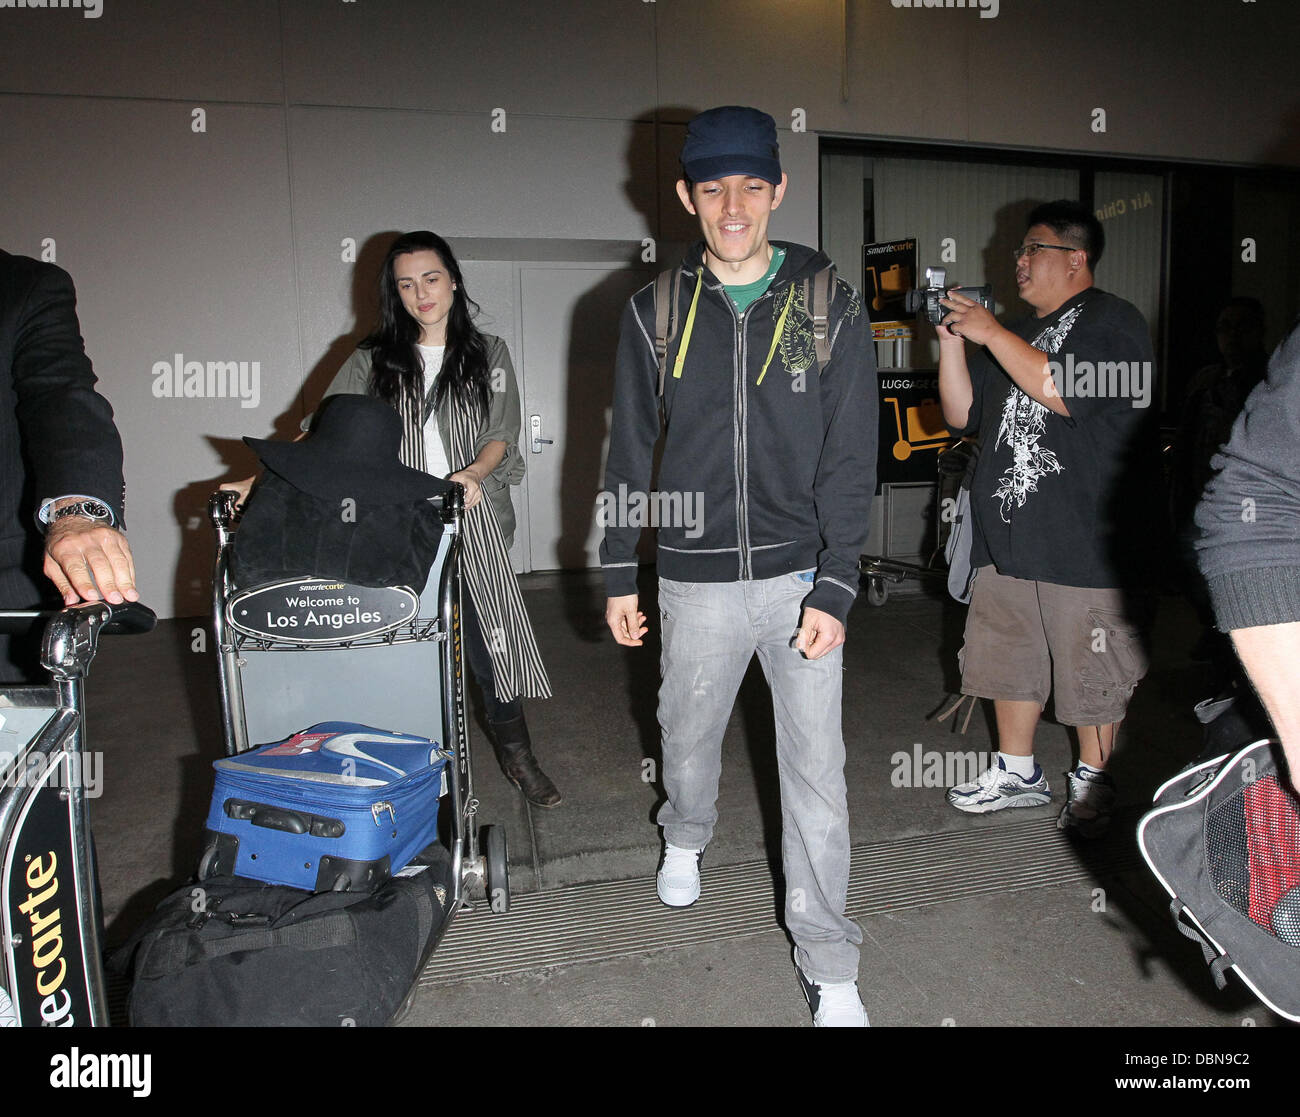 Katie McGrath and Colin Morgan The stars of international smash hit BBC television show 'Merlin' arrive at LAX on a flight from London Heathrow which was delayed over 4 hours from its scheduled arrival time. Los Angeles, California - 24.07.11 Stock Photo